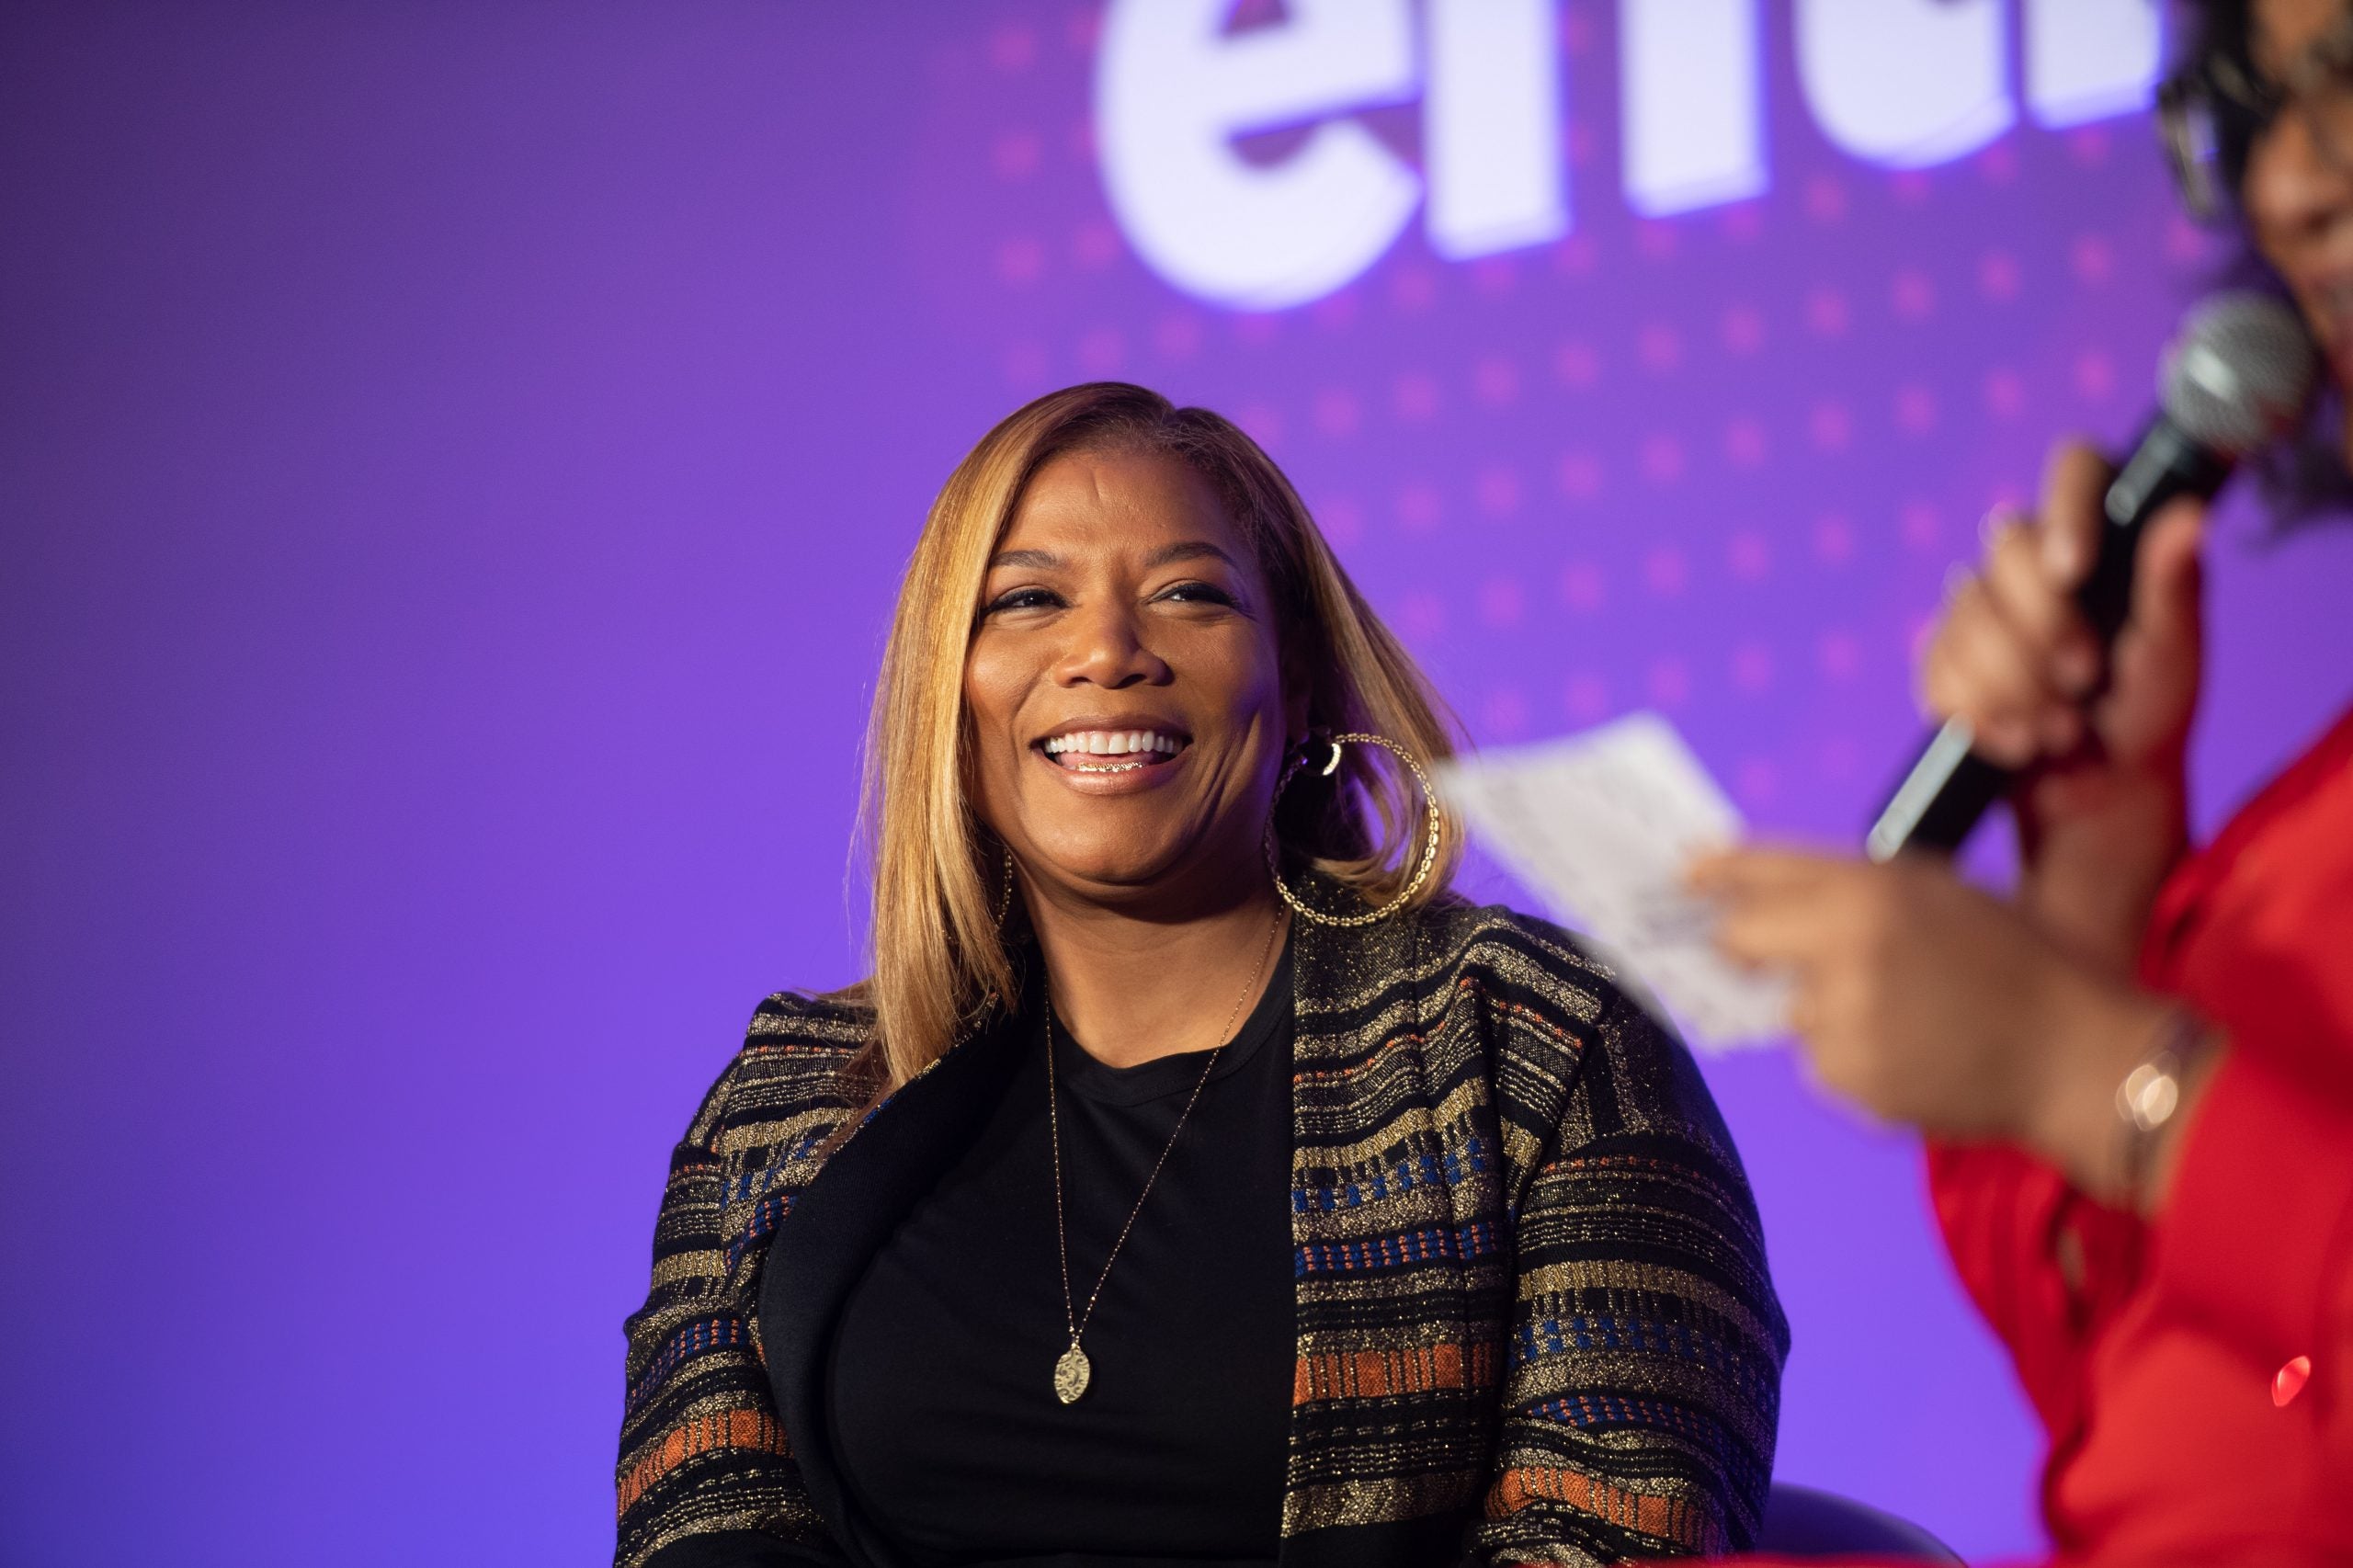 Queen Latifah To Be Honored With Lifetime Achievement Award At 2021 BET Awards